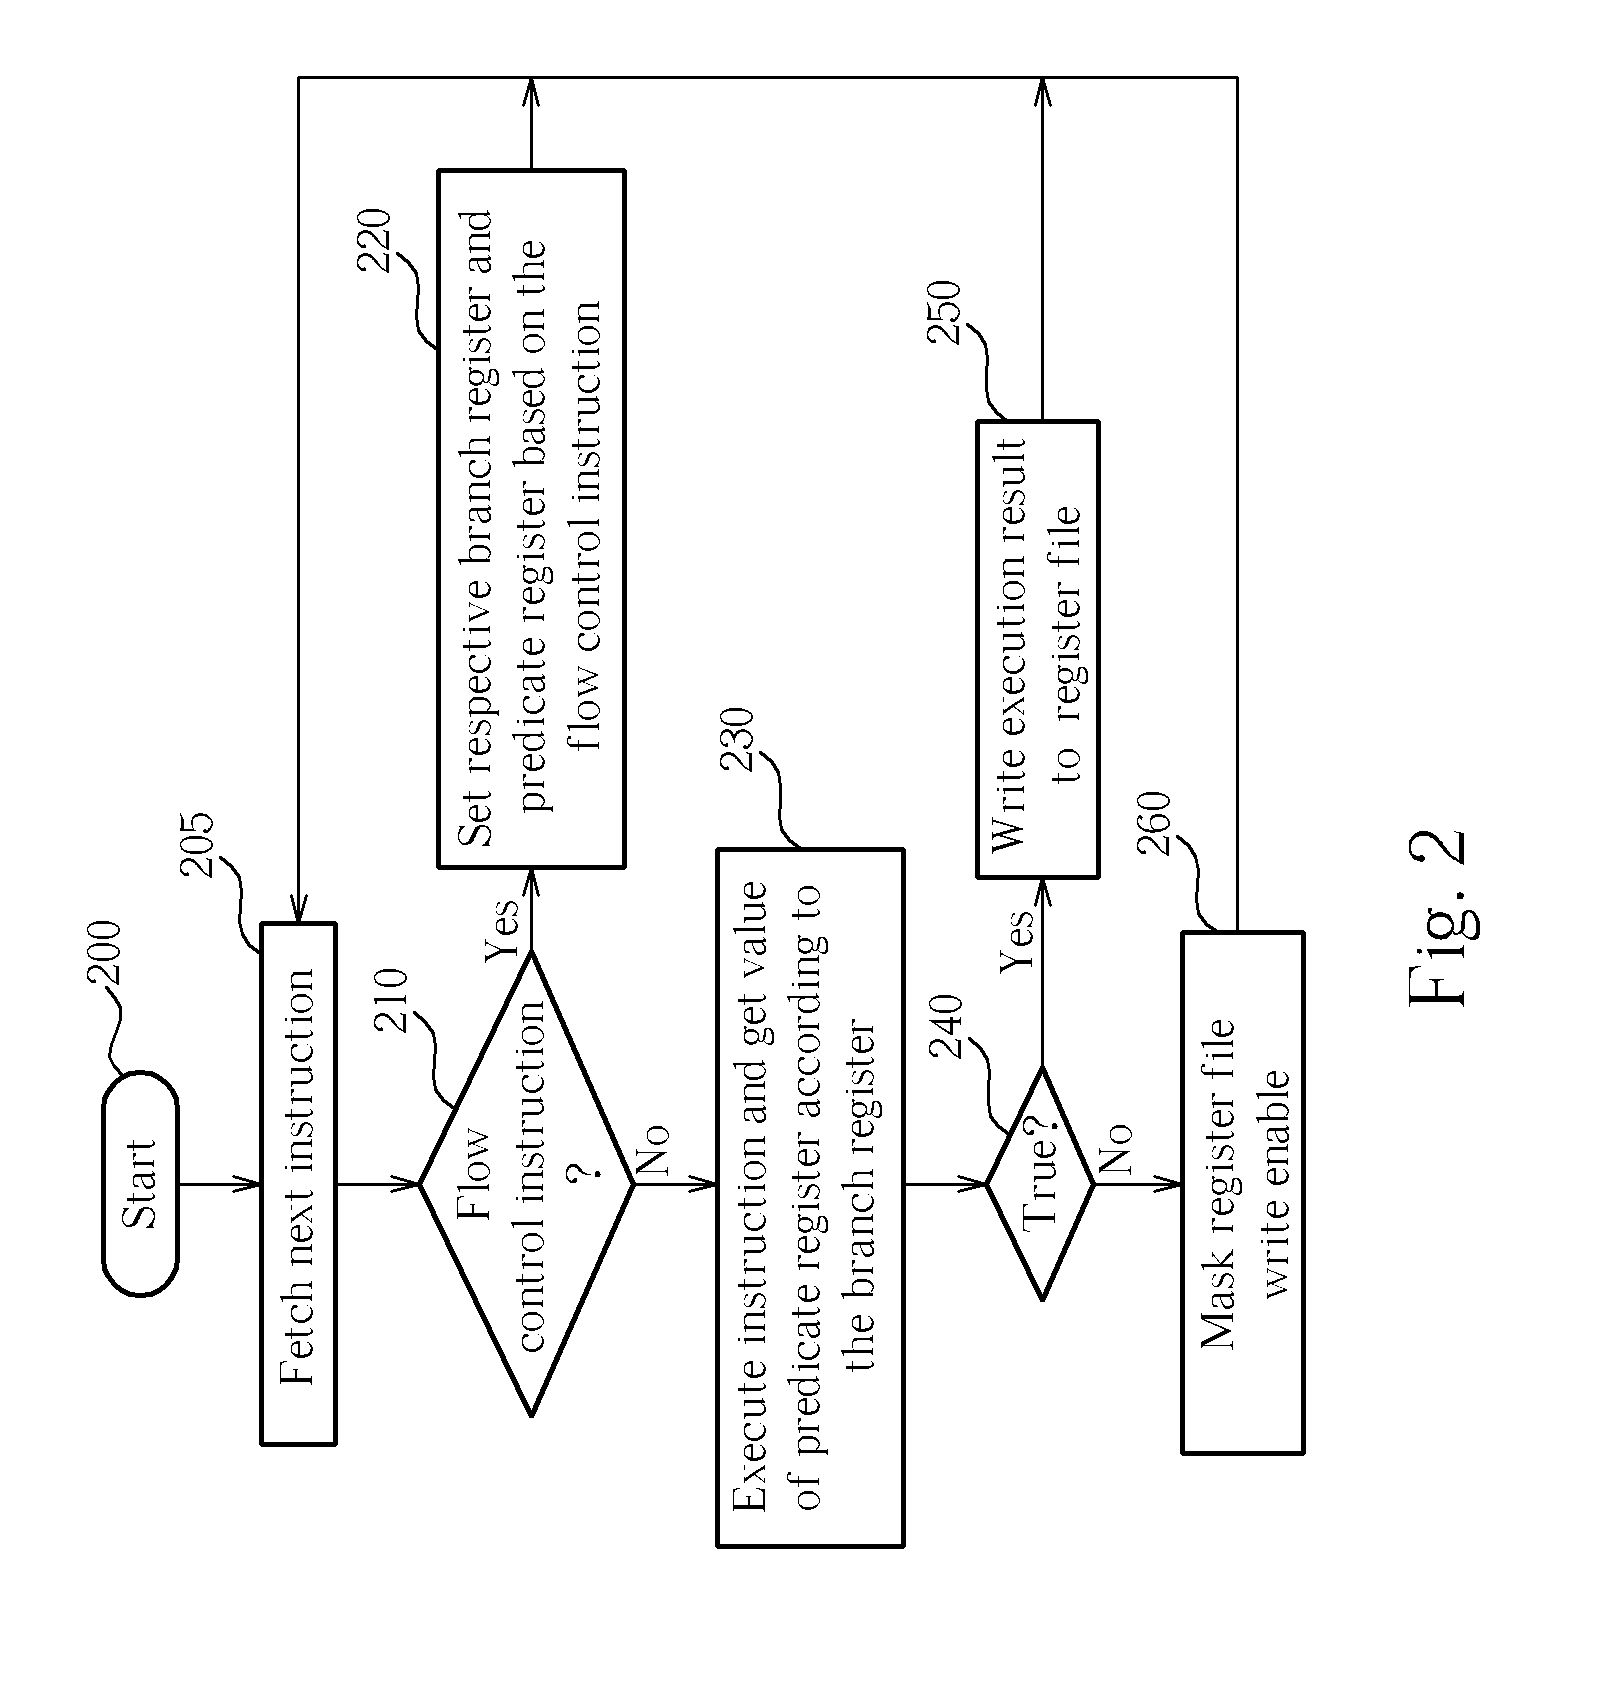 Method and processing system for nested flow control utilizing predicate register and branch register